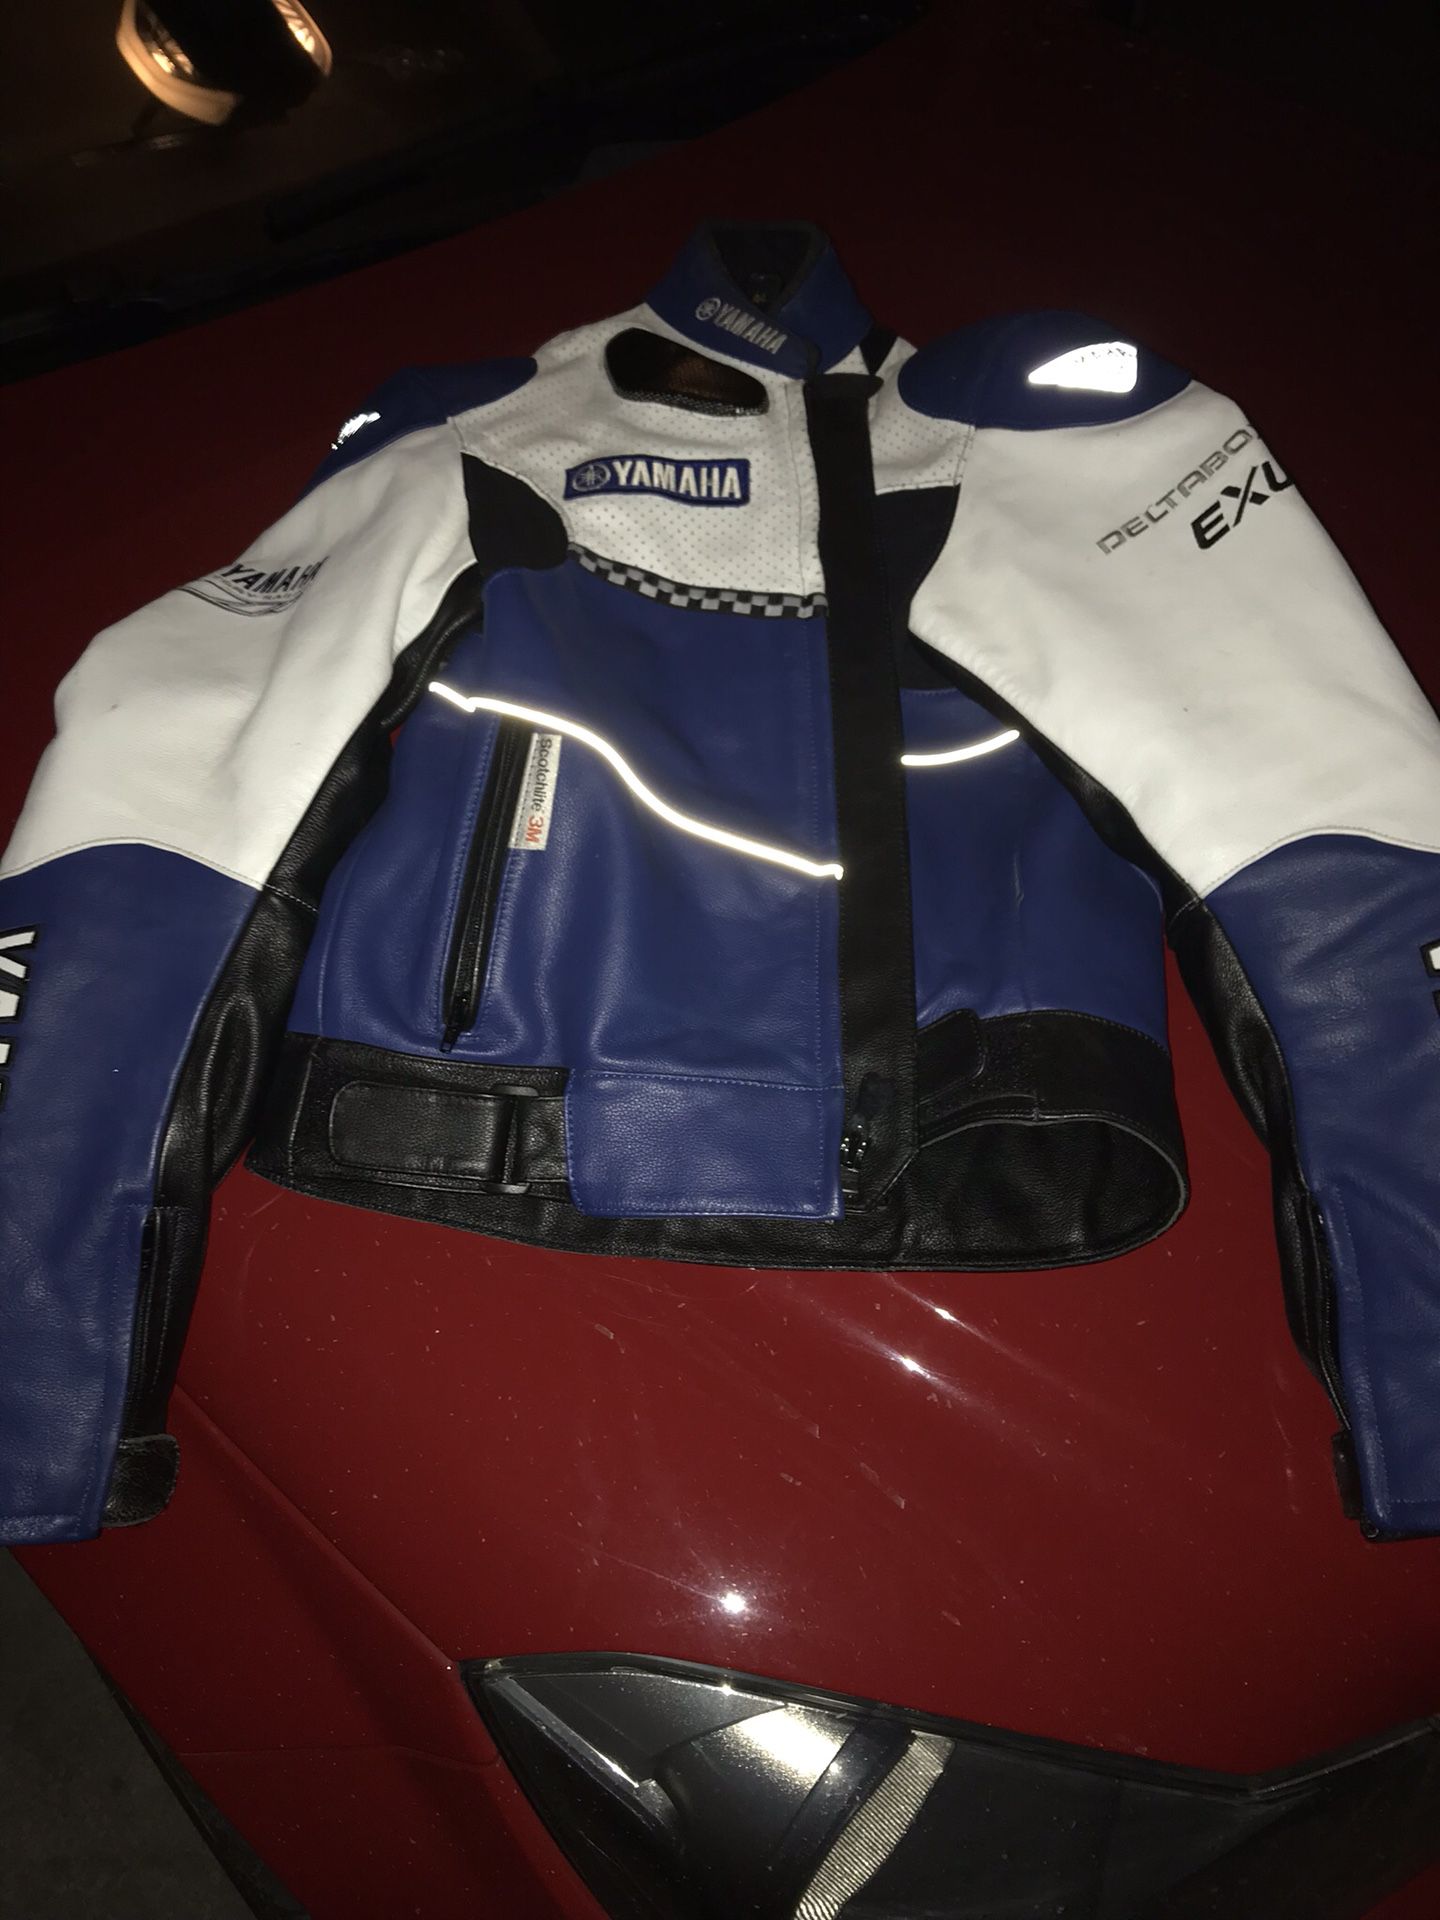 Leather Yamaha motorcycle jacket in nearly new condition. $100